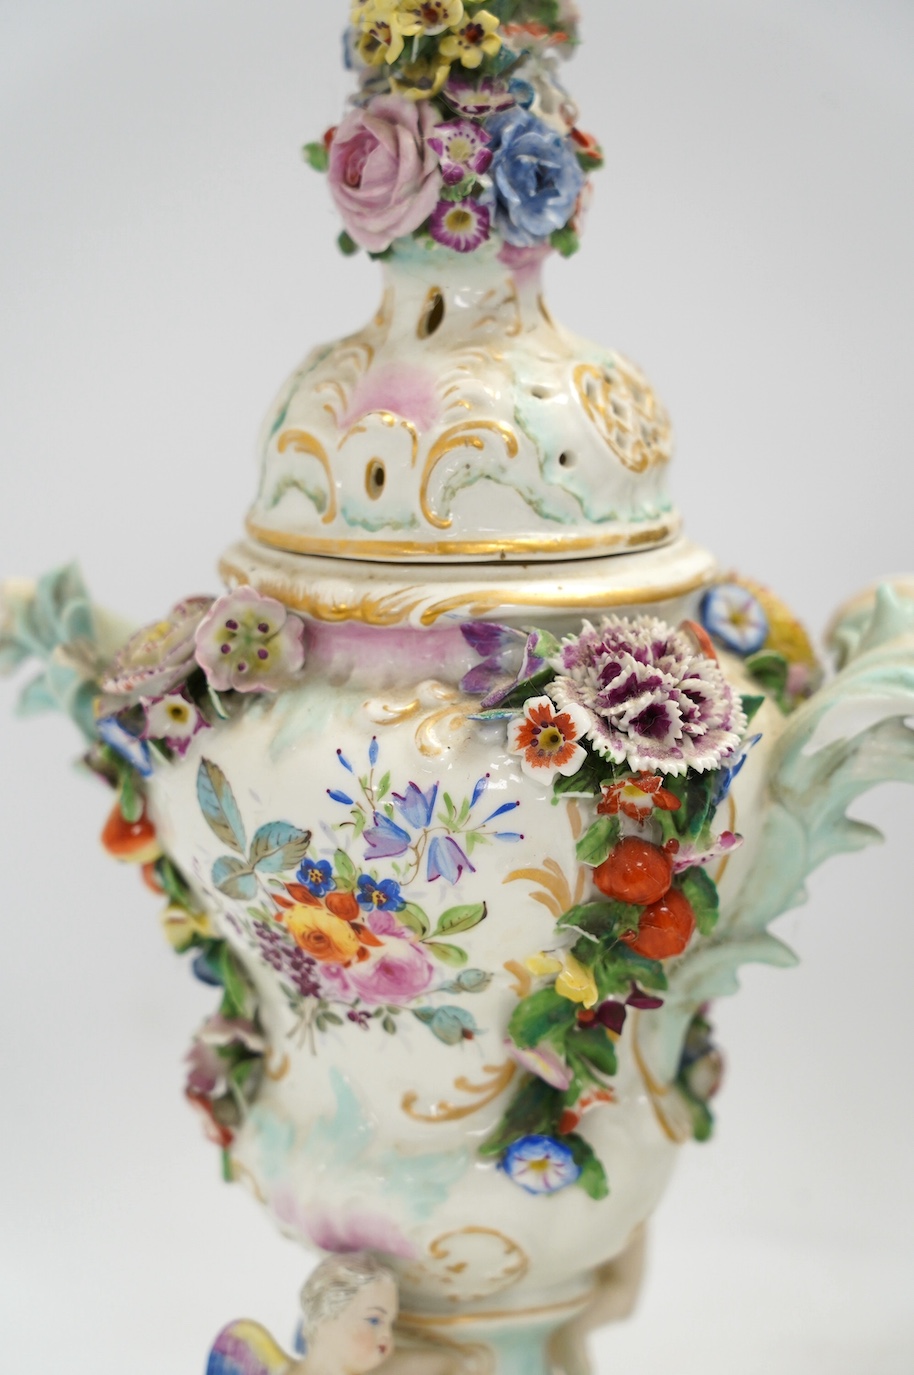 A pair of Potschappel porcelain floral encrusted vases and covers, 31cm high. Condition - poor